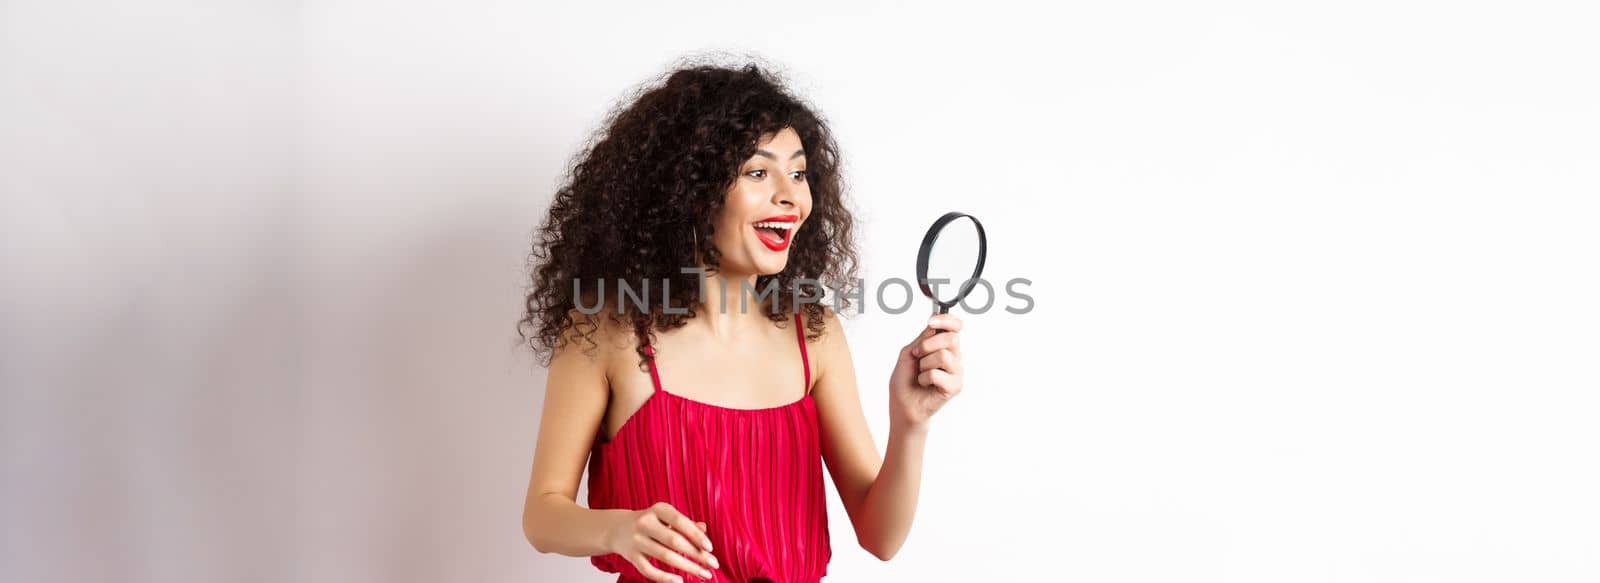 Excited woman in red dress look through magnifying glass and smiling, found interesting promo, standing on white background.